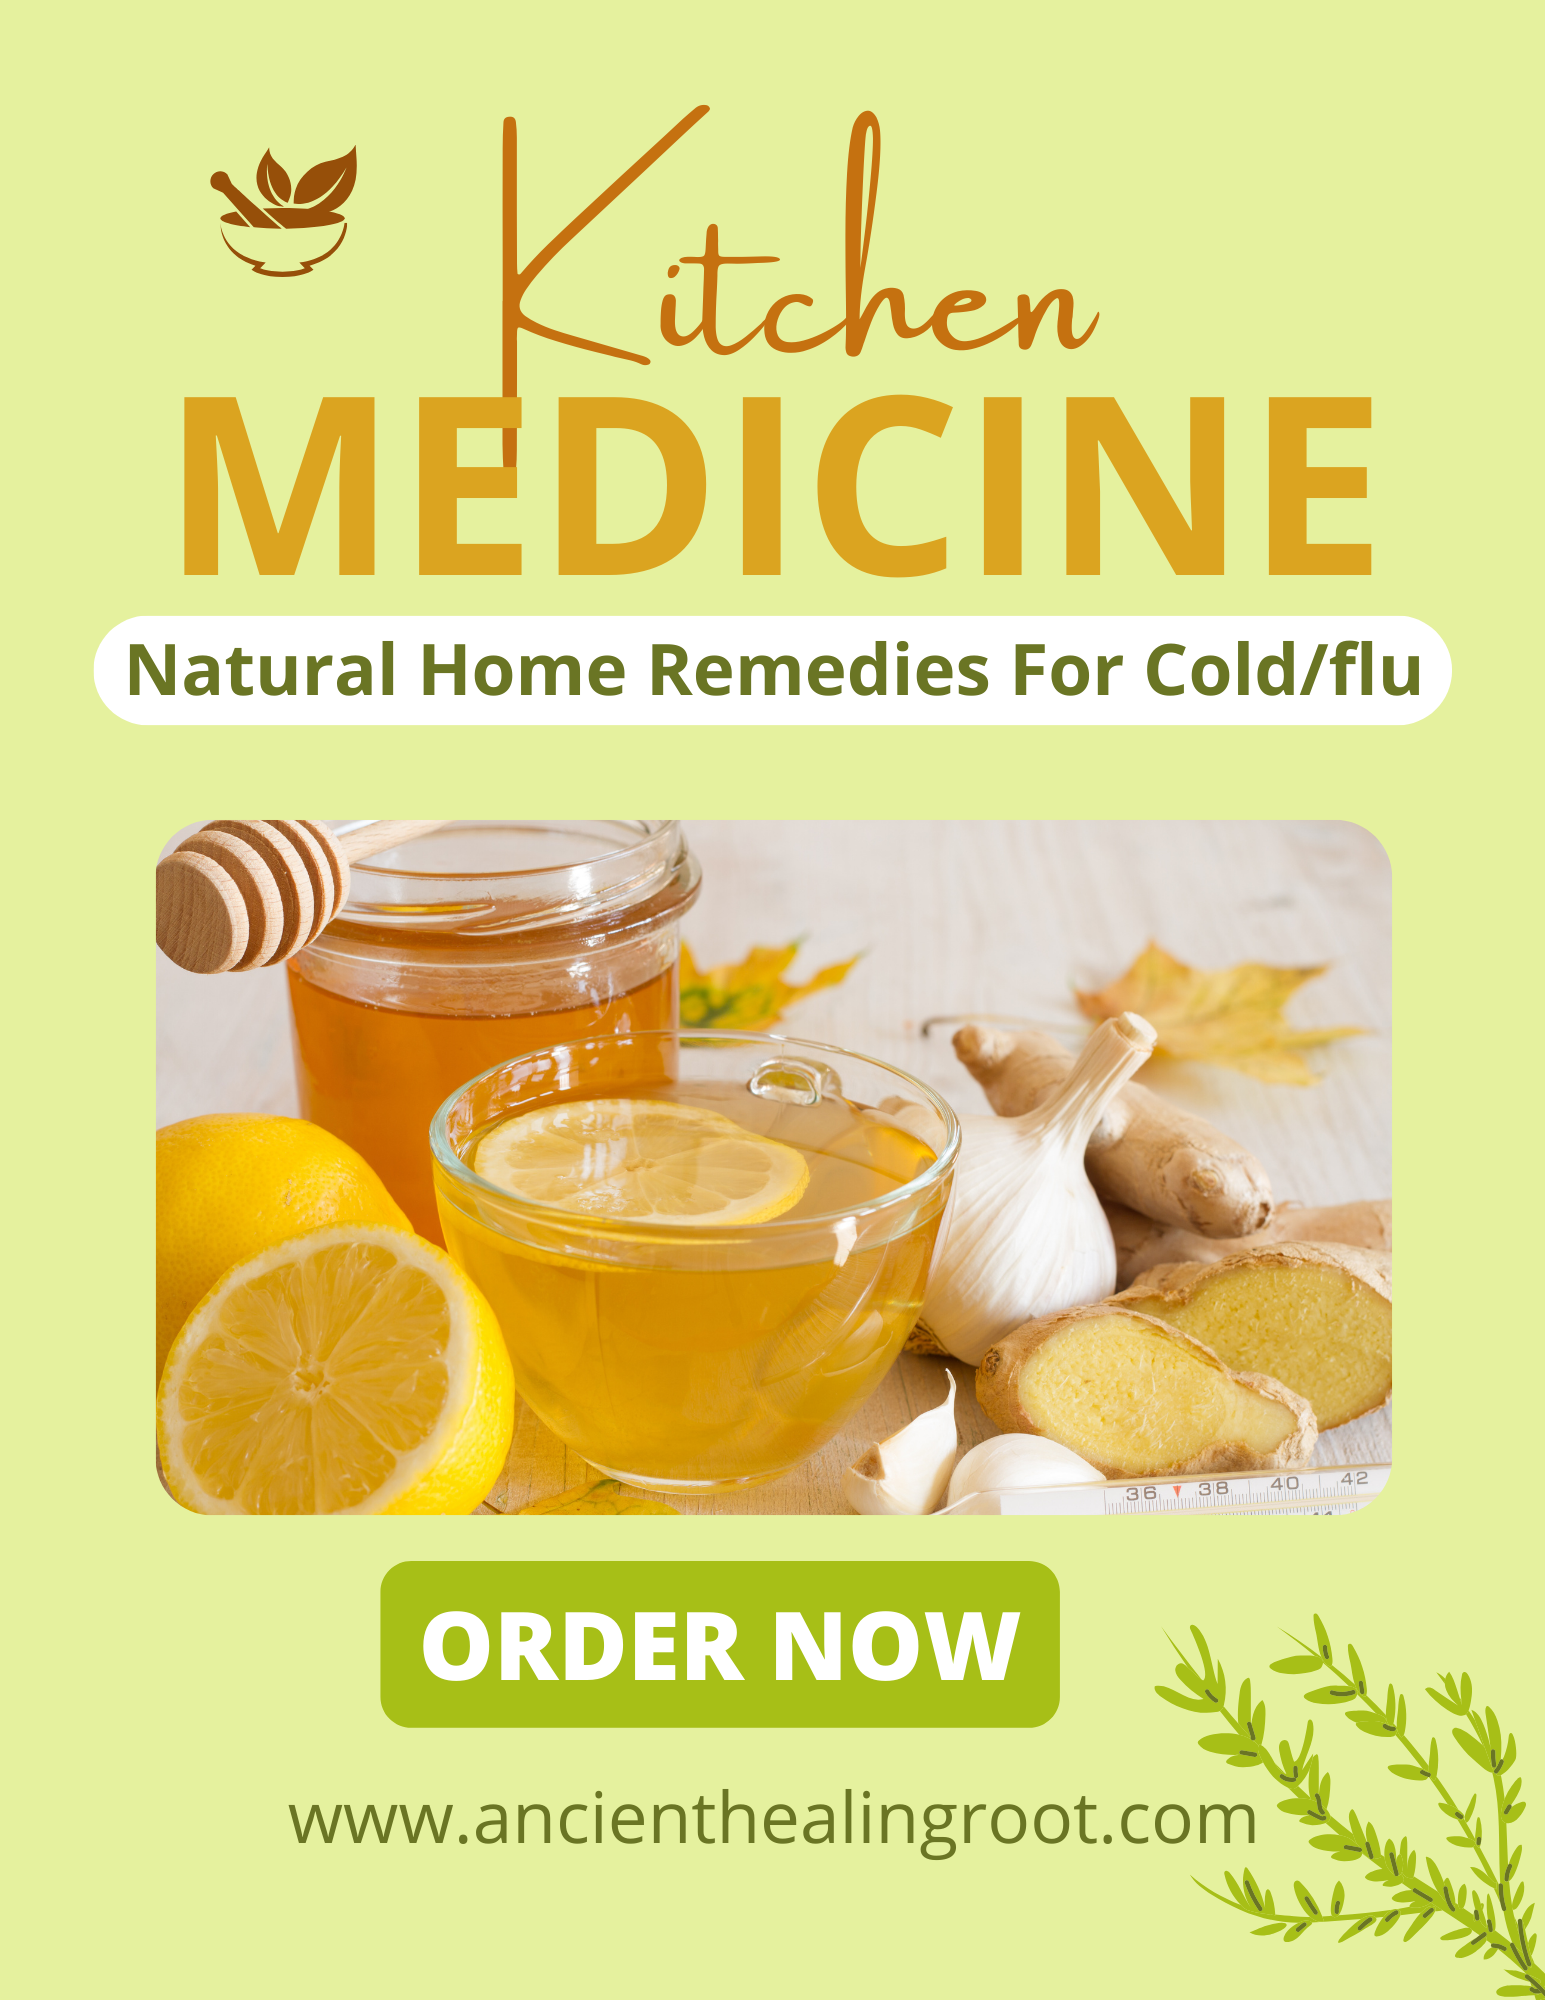 Home Remedies for Cold/Flu - Kitchen Medicine Guide